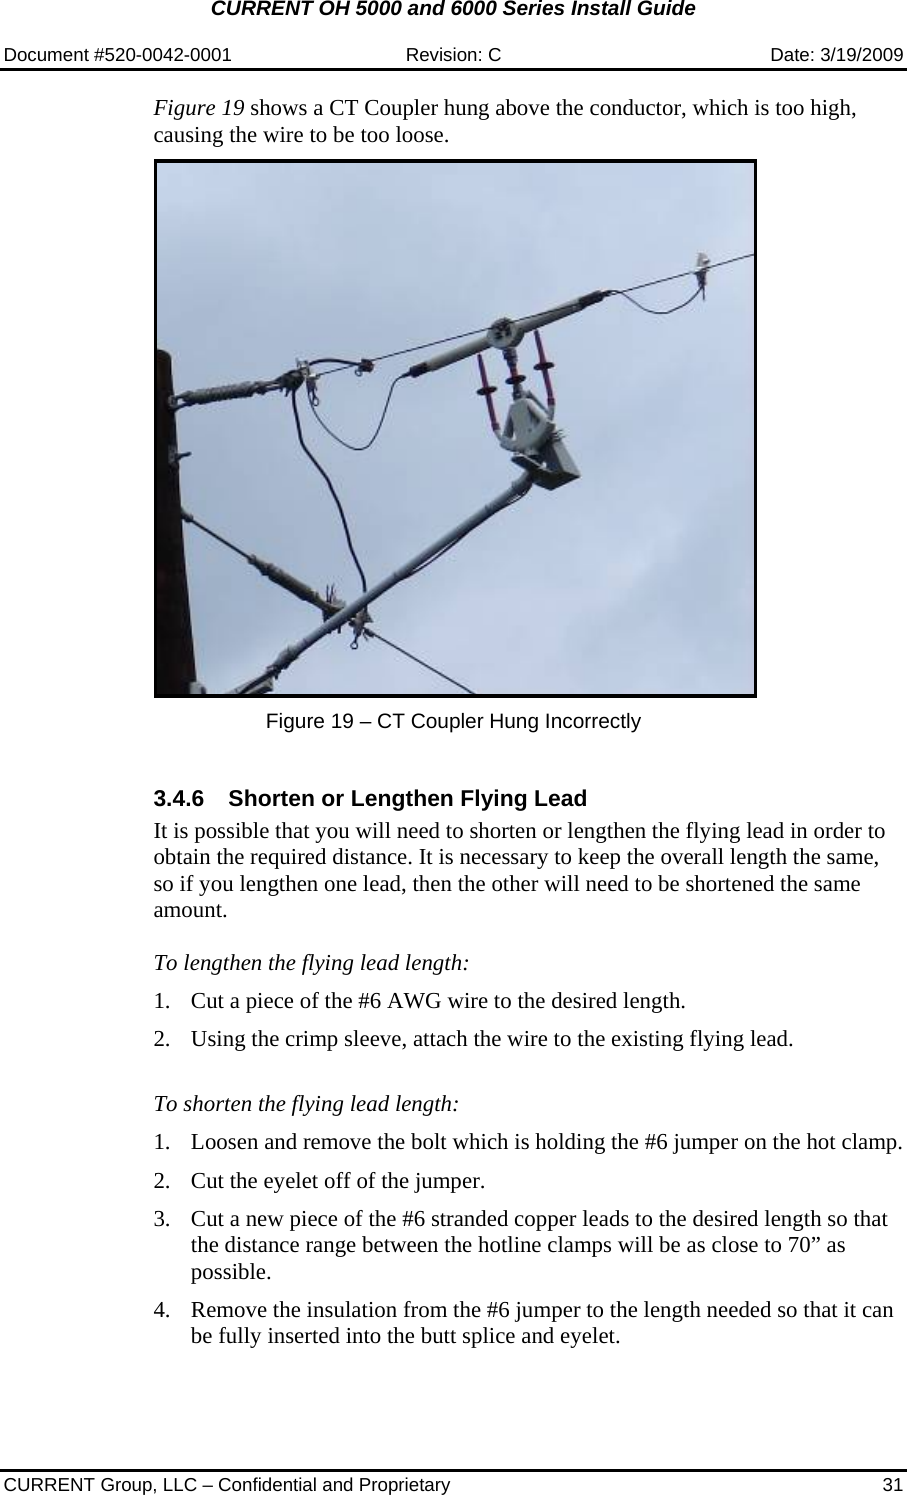 CURRENT OH 5000 and 6000 Series Install Guide  Document #520-0042-0001  Revision: C  Date: 3/19/2009  CURRENT Group, LLC – Confidential and Proprietary  31 Figure 19 shows a CT Coupler hung above the conductor, which is too high, causing the wire to be too loose.    Figure 19 – CT Coupler Hung Incorrectly  3.4.6  Shorten or Lengthen Flying Lead It is possible that you will need to shorten or lengthen the flying lead in order to obtain the required distance. It is necessary to keep the overall length the same, so if you lengthen one lead, then the other will need to be shortened the same amount.  To lengthen the flying lead length:  1. Cut a piece of the #6 AWG wire to the desired length.   2. Using the crimp sleeve, attach the wire to the existing flying lead.   To shorten the flying lead length:  1. Loosen and remove the bolt which is holding the #6 jumper on the hot clamp.  2. Cut the eyelet off of the jumper.  3. Cut a new piece of the #6 stranded copper leads to the desired length so that the distance range between the hotline clamps will be as close to 70” as possible.  4. Remove the insulation from the #6 jumper to the length needed so that it can be fully inserted into the butt splice and eyelet. 